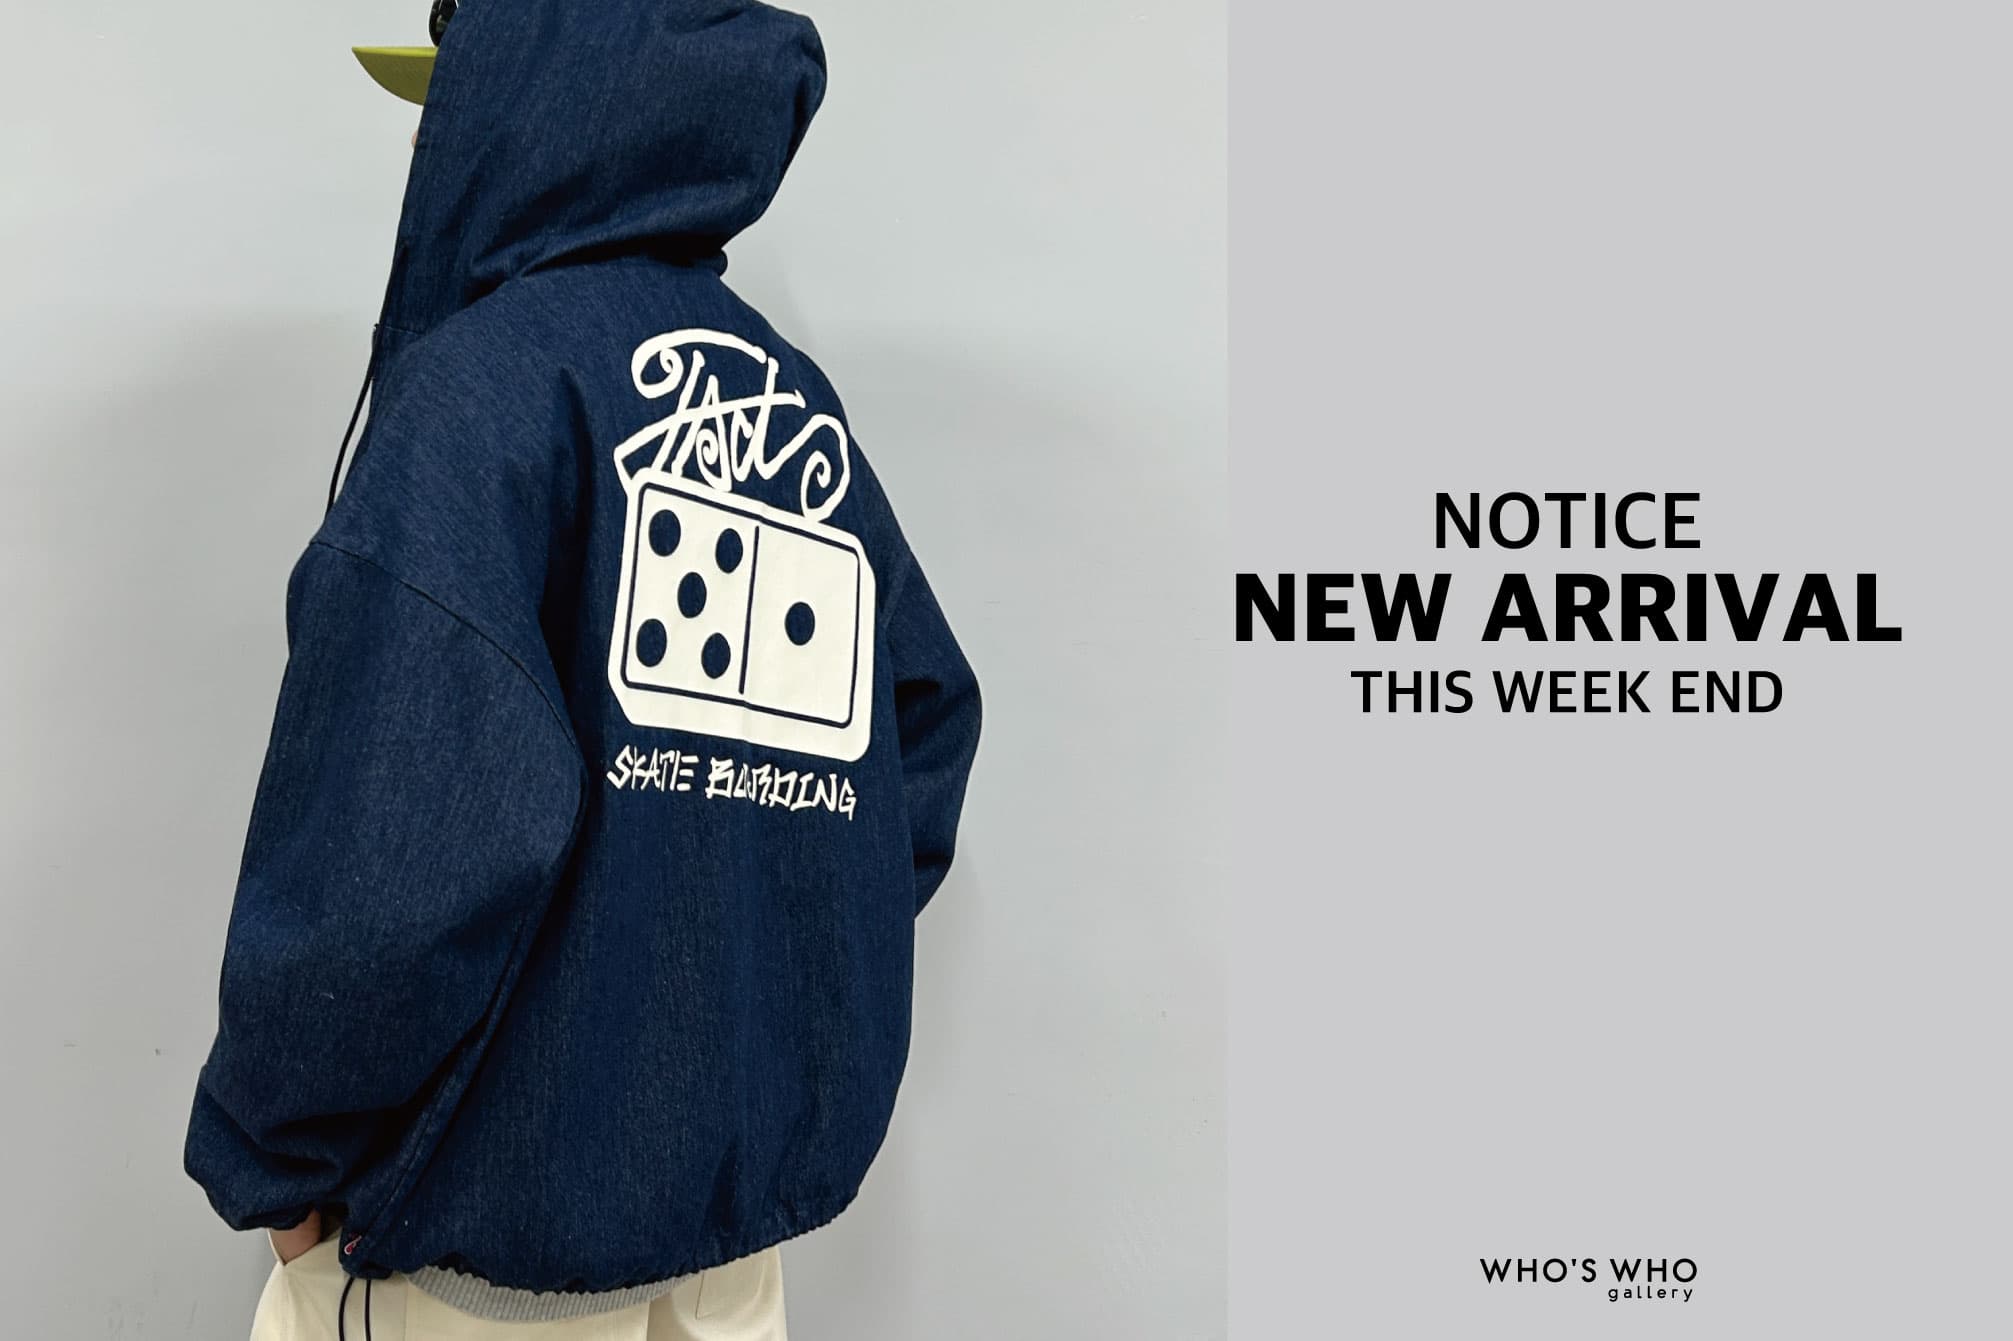 WHO’S WHO gallery 【NEW ARRIVAL NOTICE -02.22-】